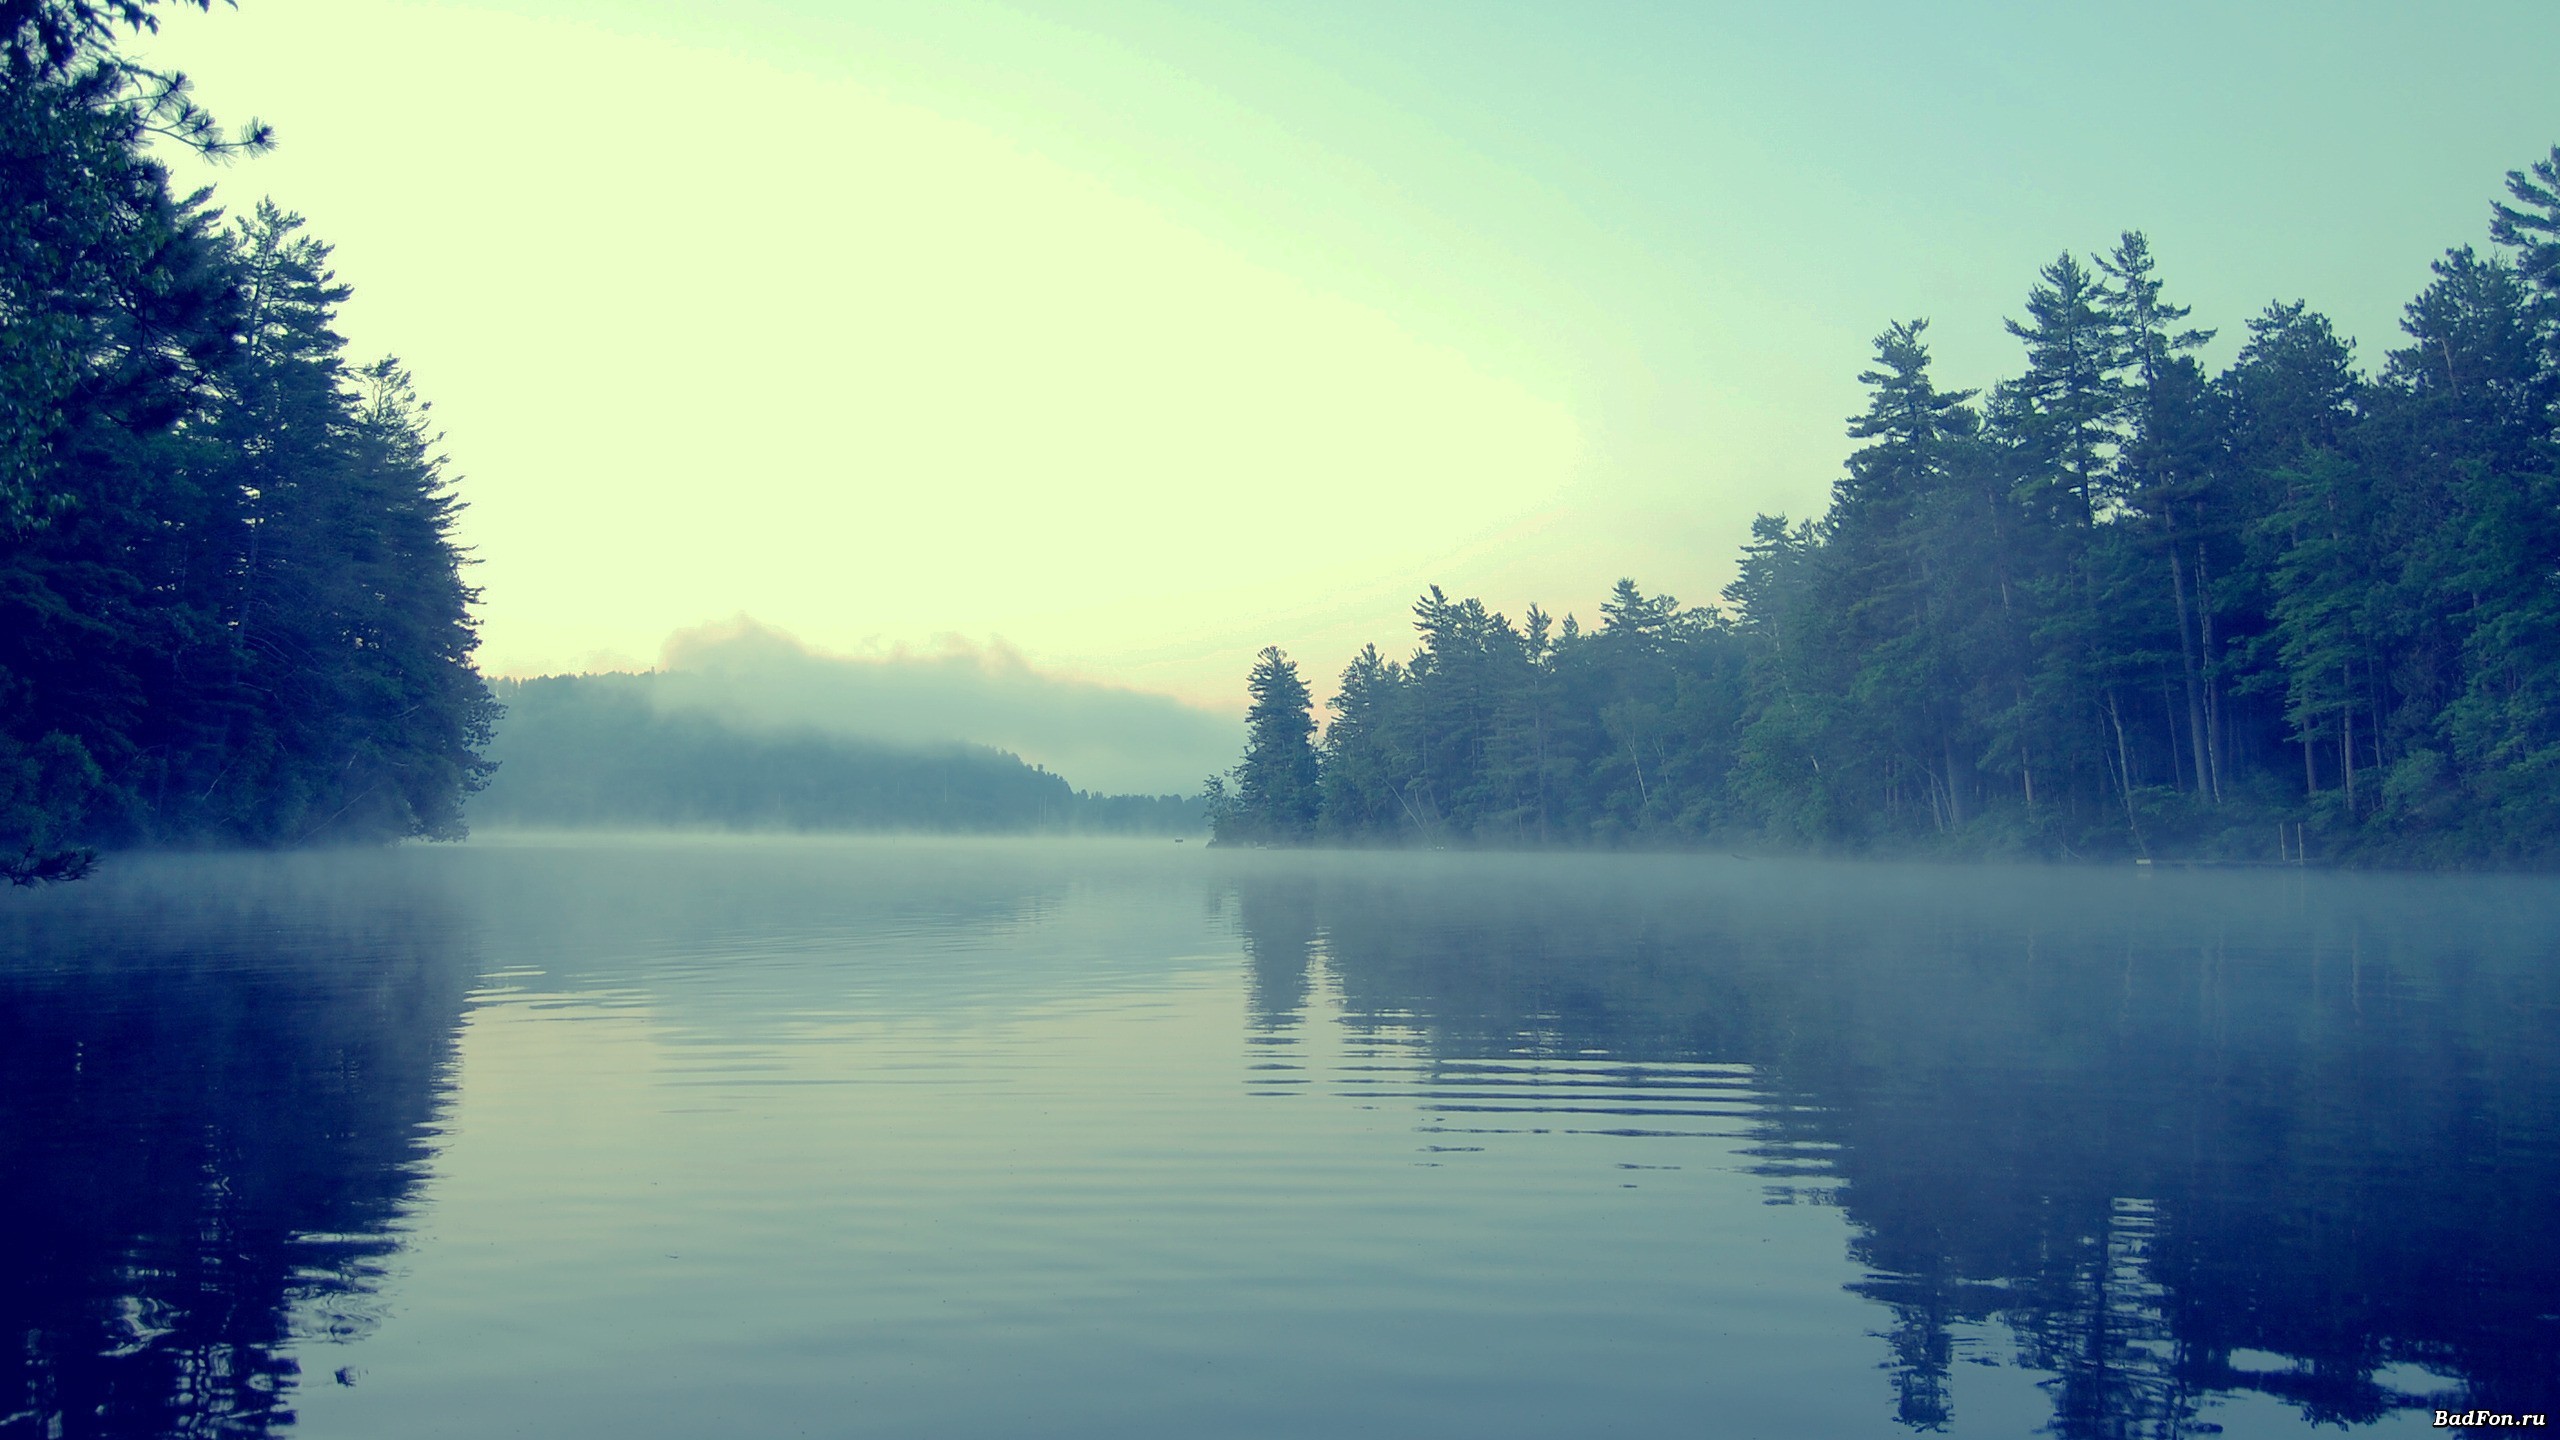 General 2560x1440 lake forest mist nature water